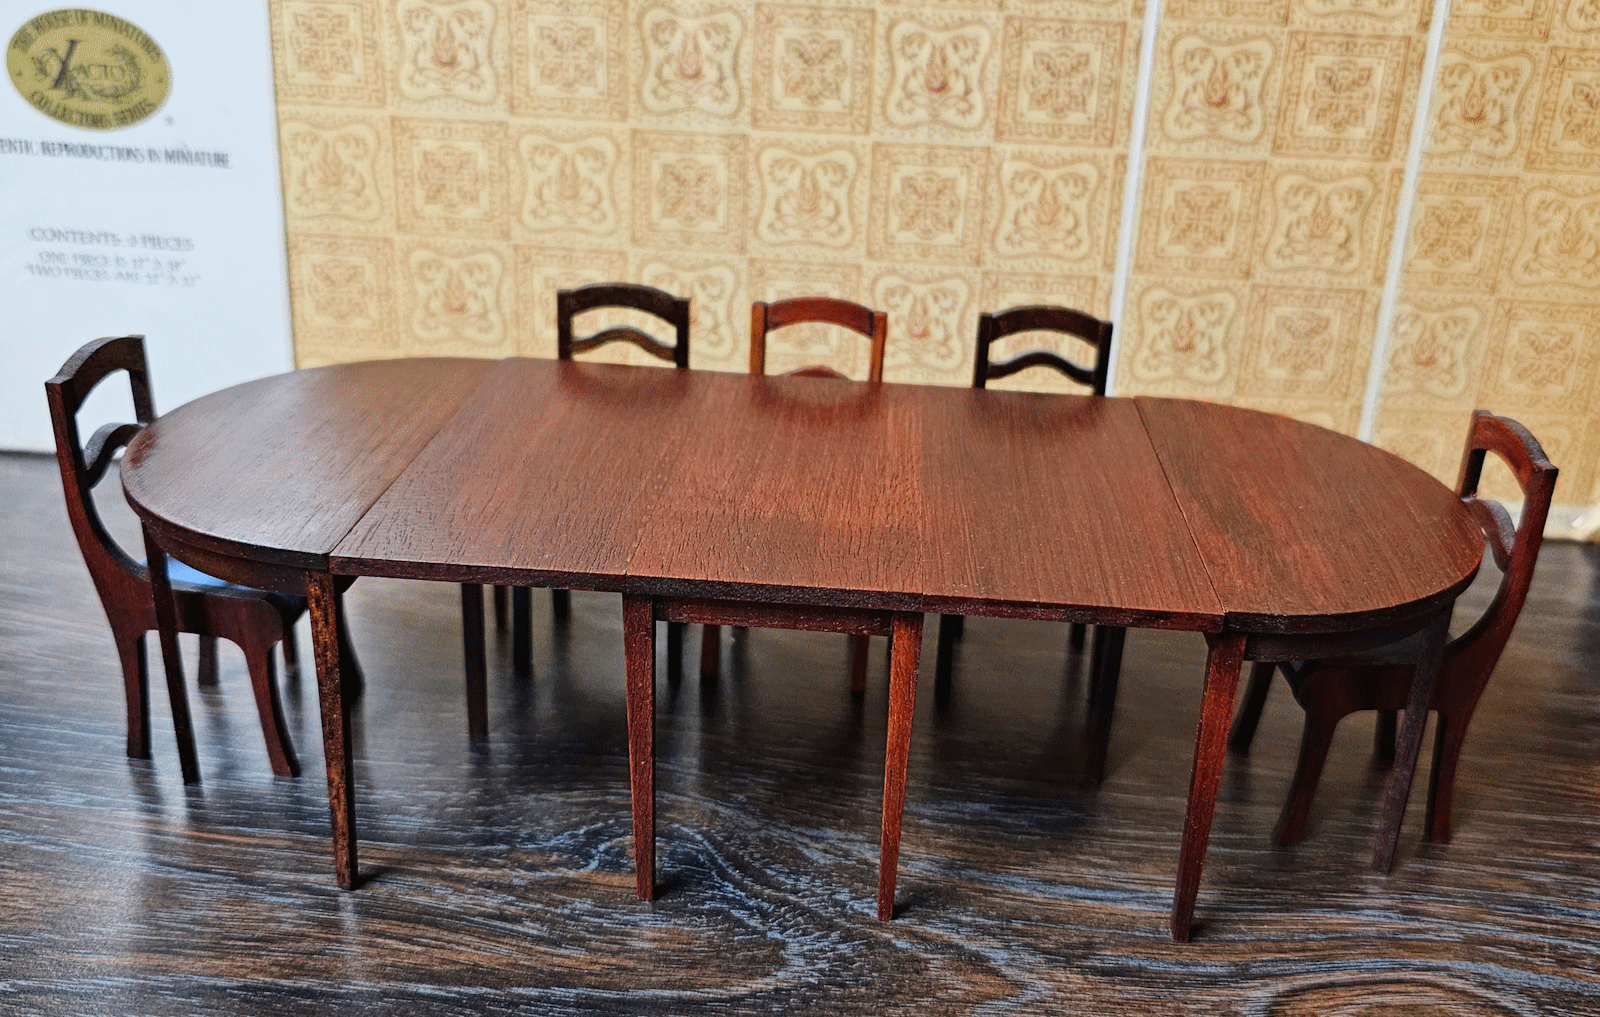 Finished kit of Hepplewhite 3 piece Dining Room Table